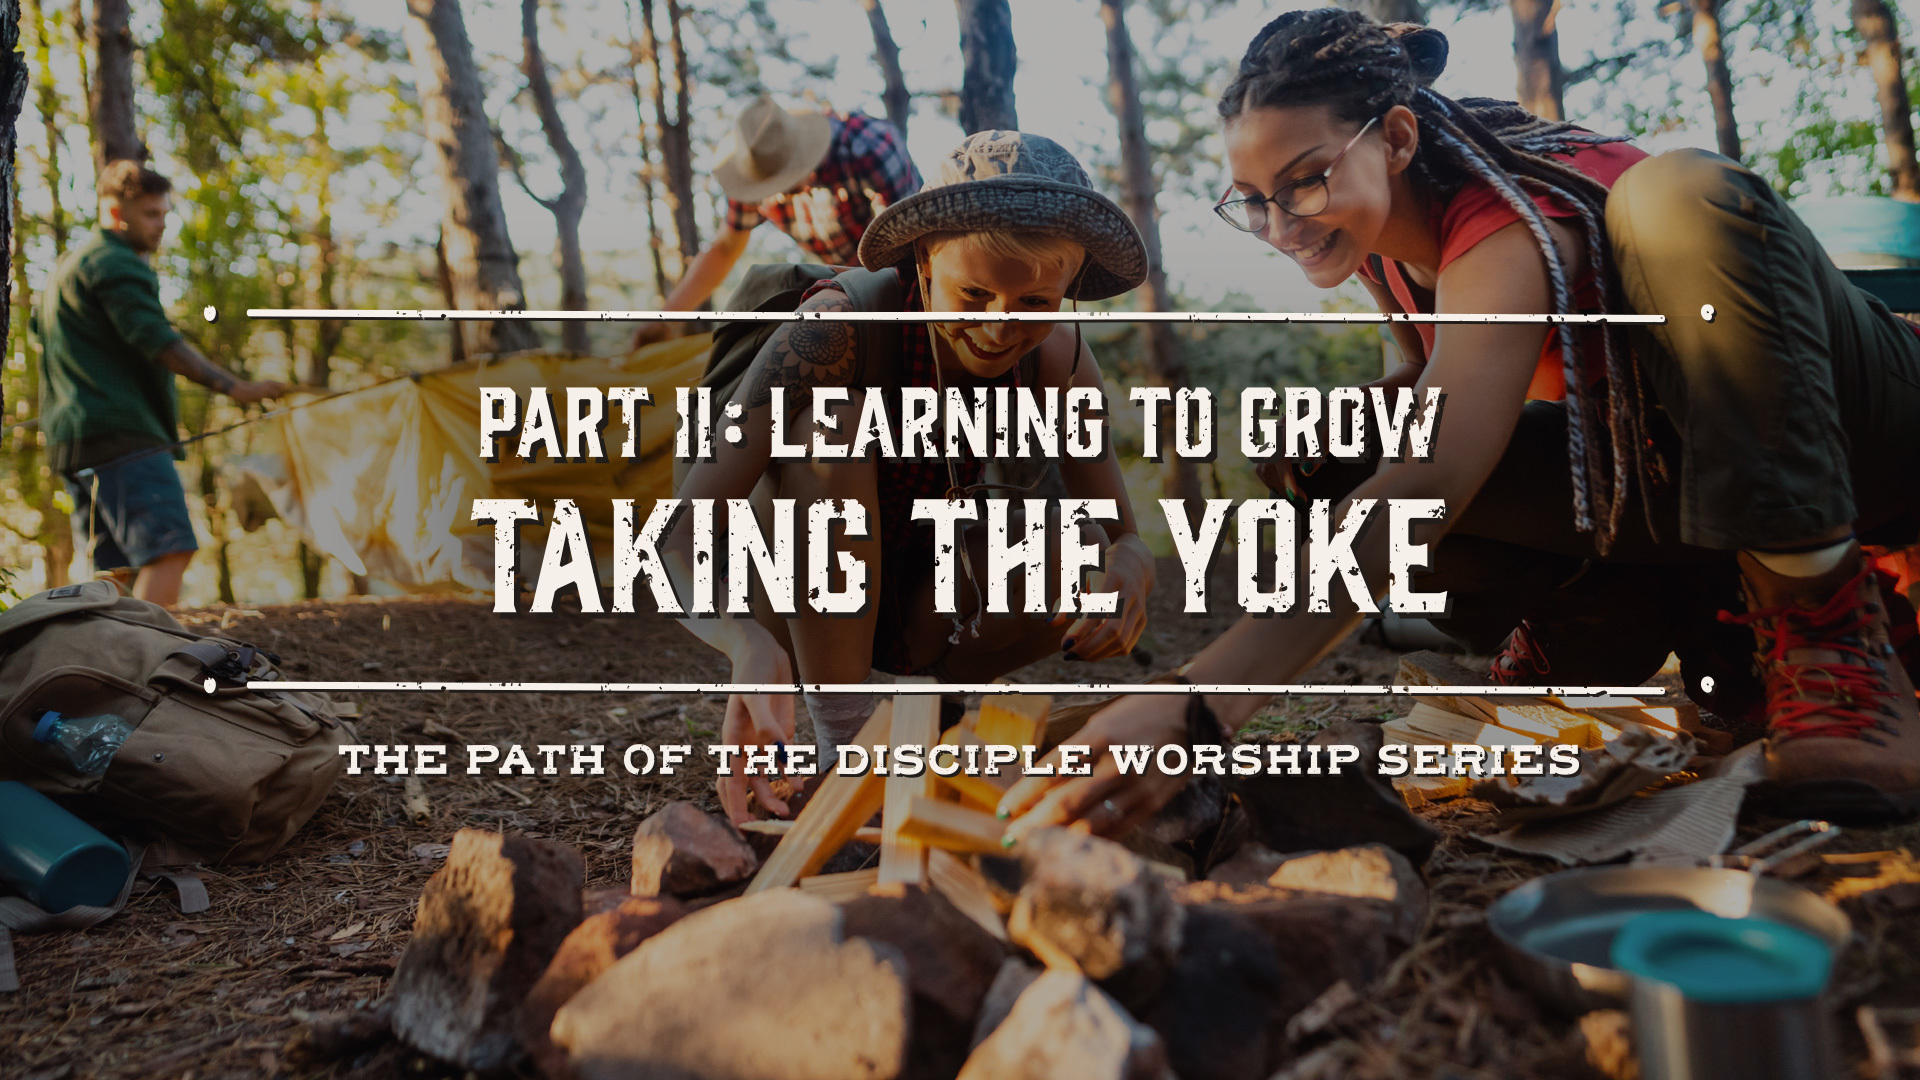 The Path of the Disciple: Learning to Grow | Taking the Yoke